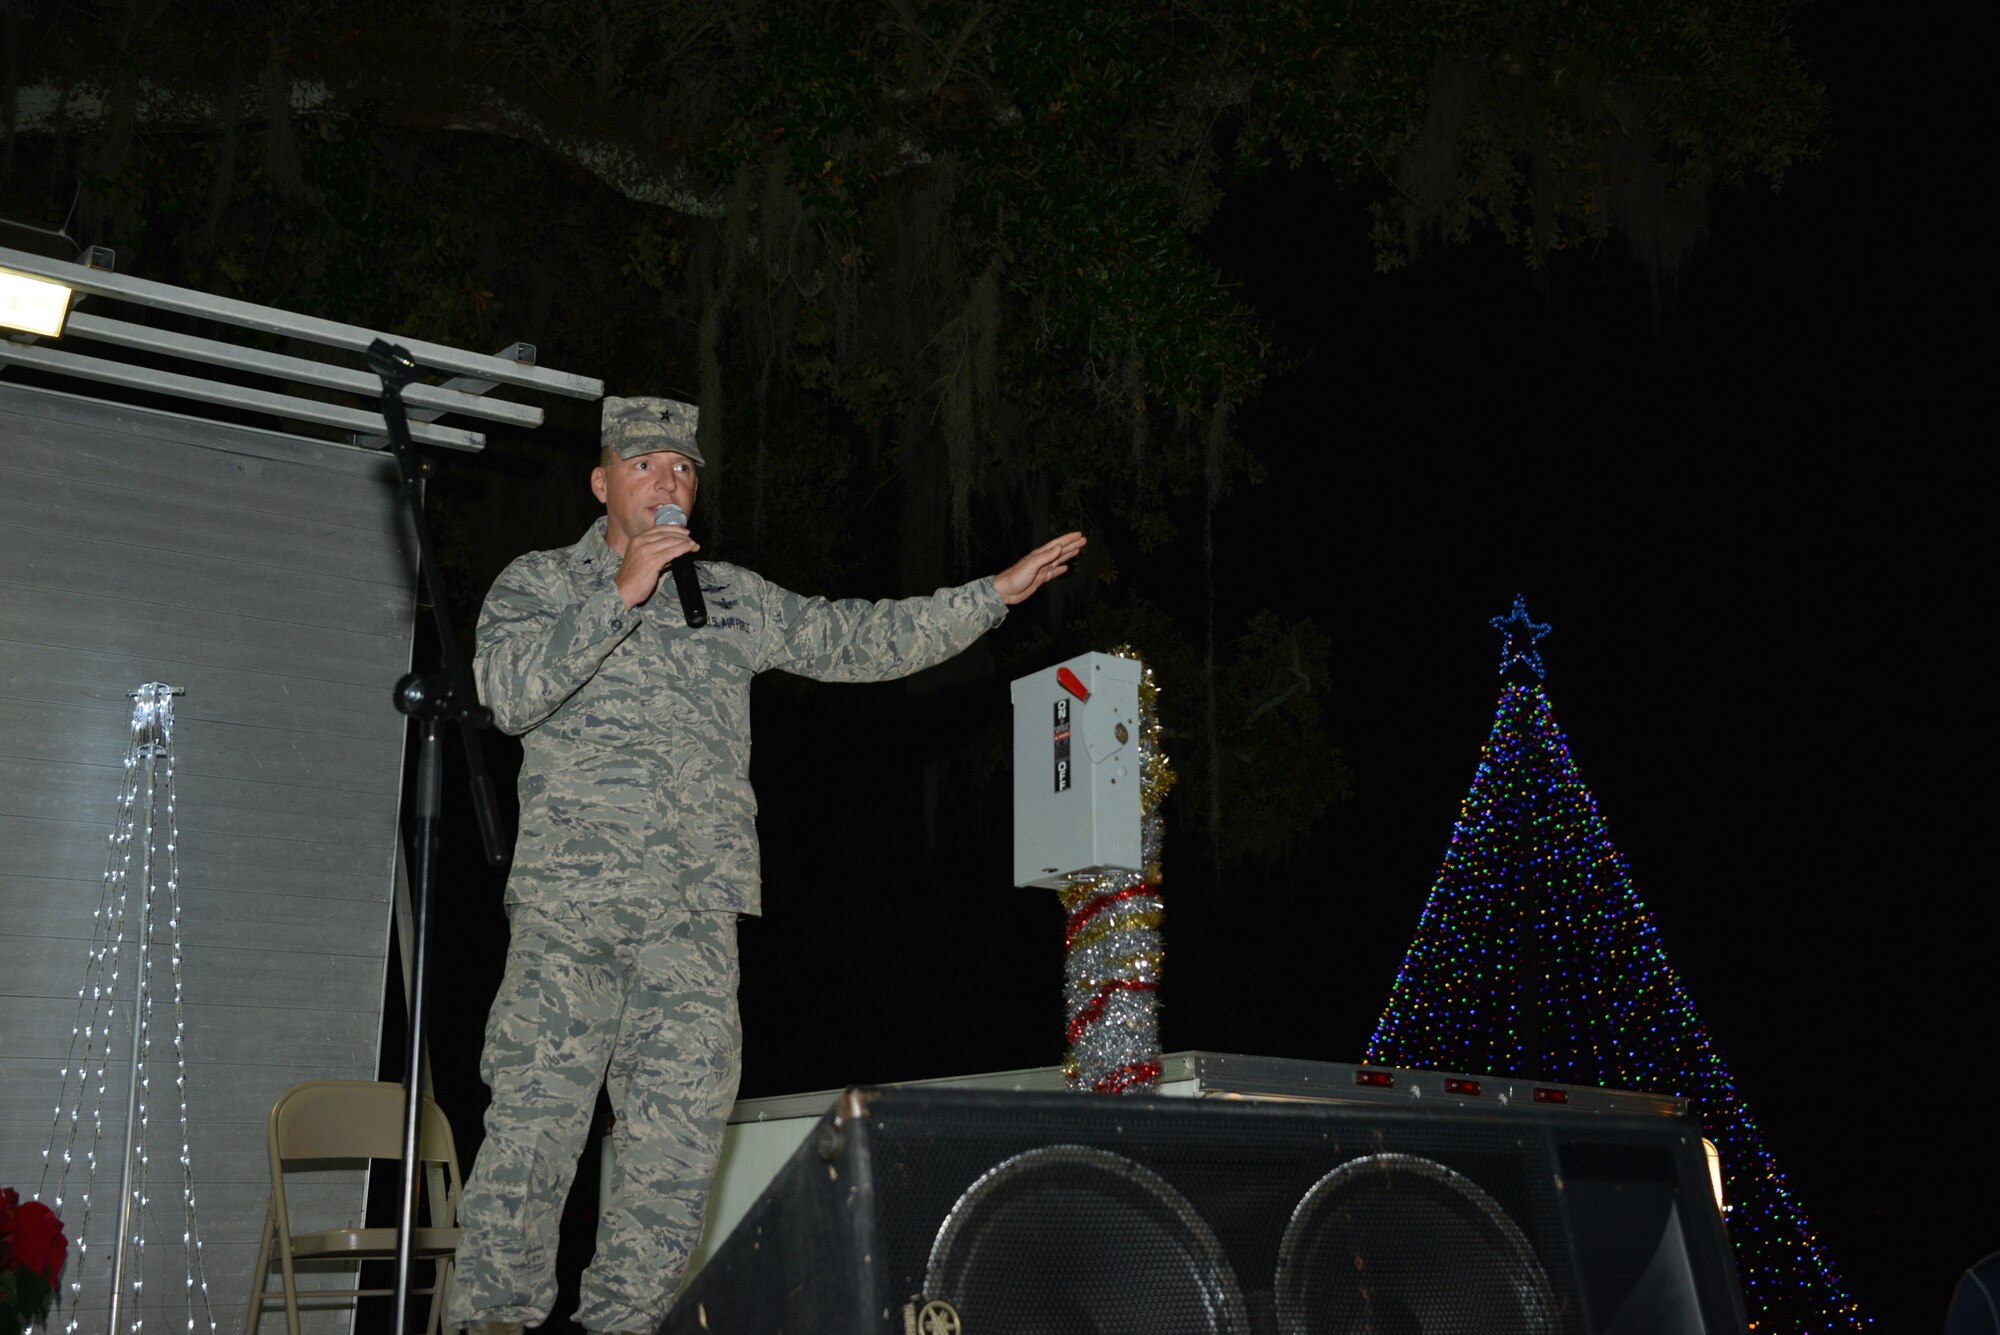 Brig. Gen. Patrick Higby, 81st Training Wing commander, delivers opening remarks to guests at Christmas in the Park Dec. 3, 2014, at Marina Park, Keesler Air Force Base, Miss. The event, hosted by Outdoor Recreation, included a tree lighting ceremony, hay rides, holiday music, cookie decorating and visits with Santa. (U.S. Air Force photo by Marie Floyd)